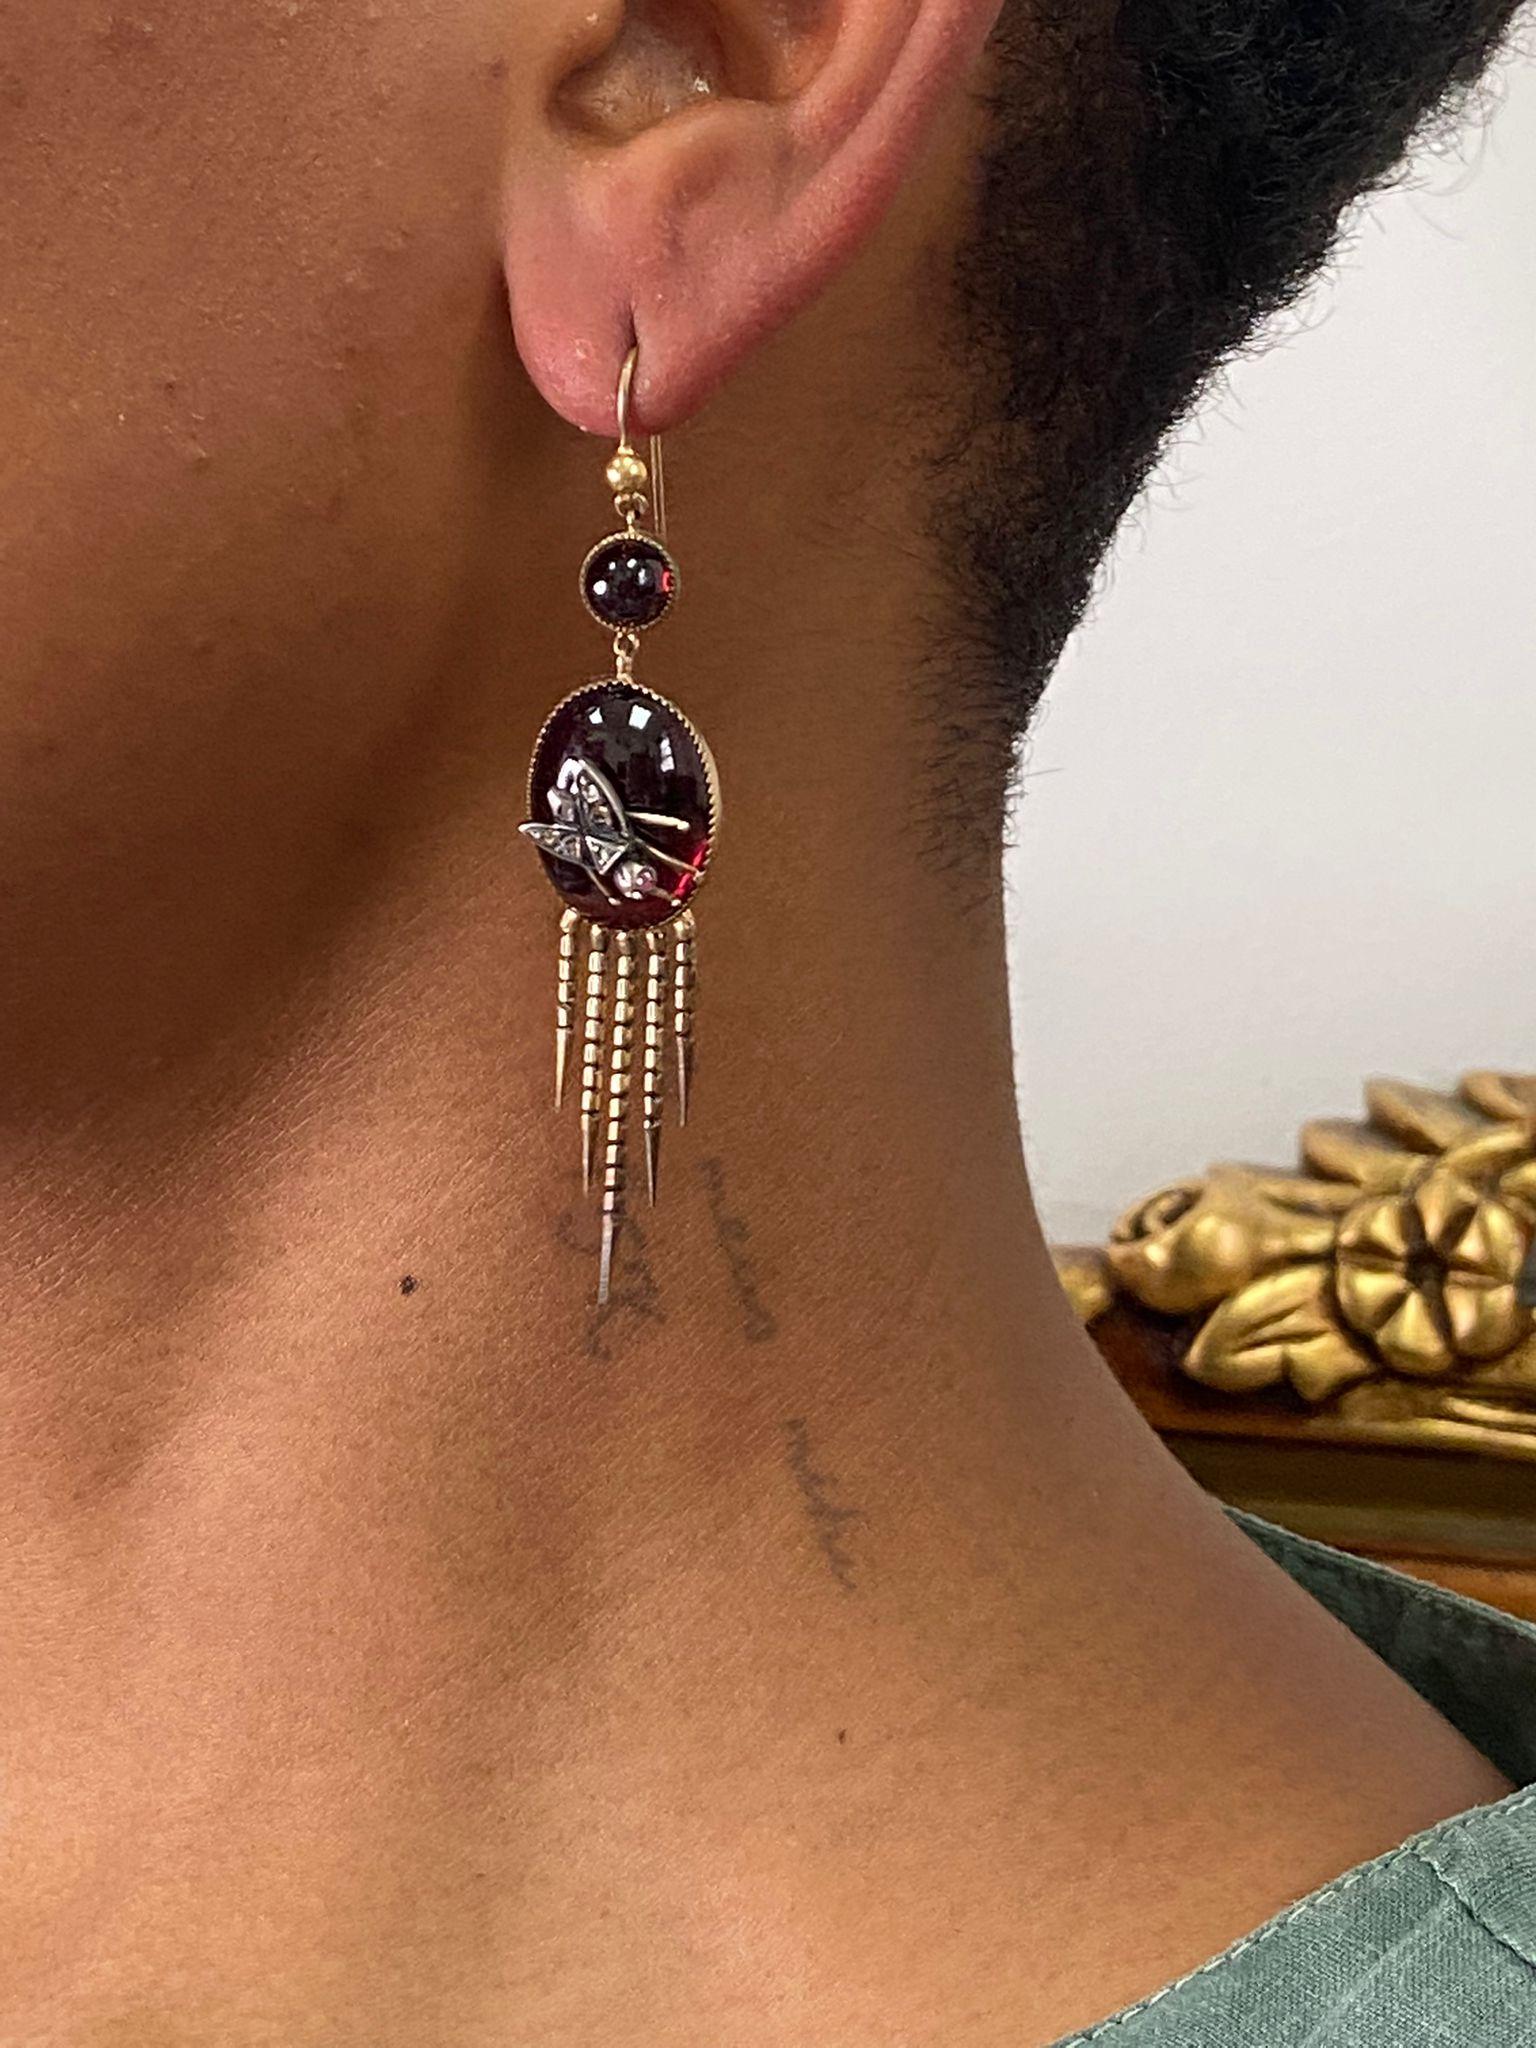 Women's English Victorian Fringed Earrings with Garnet and Diamonds